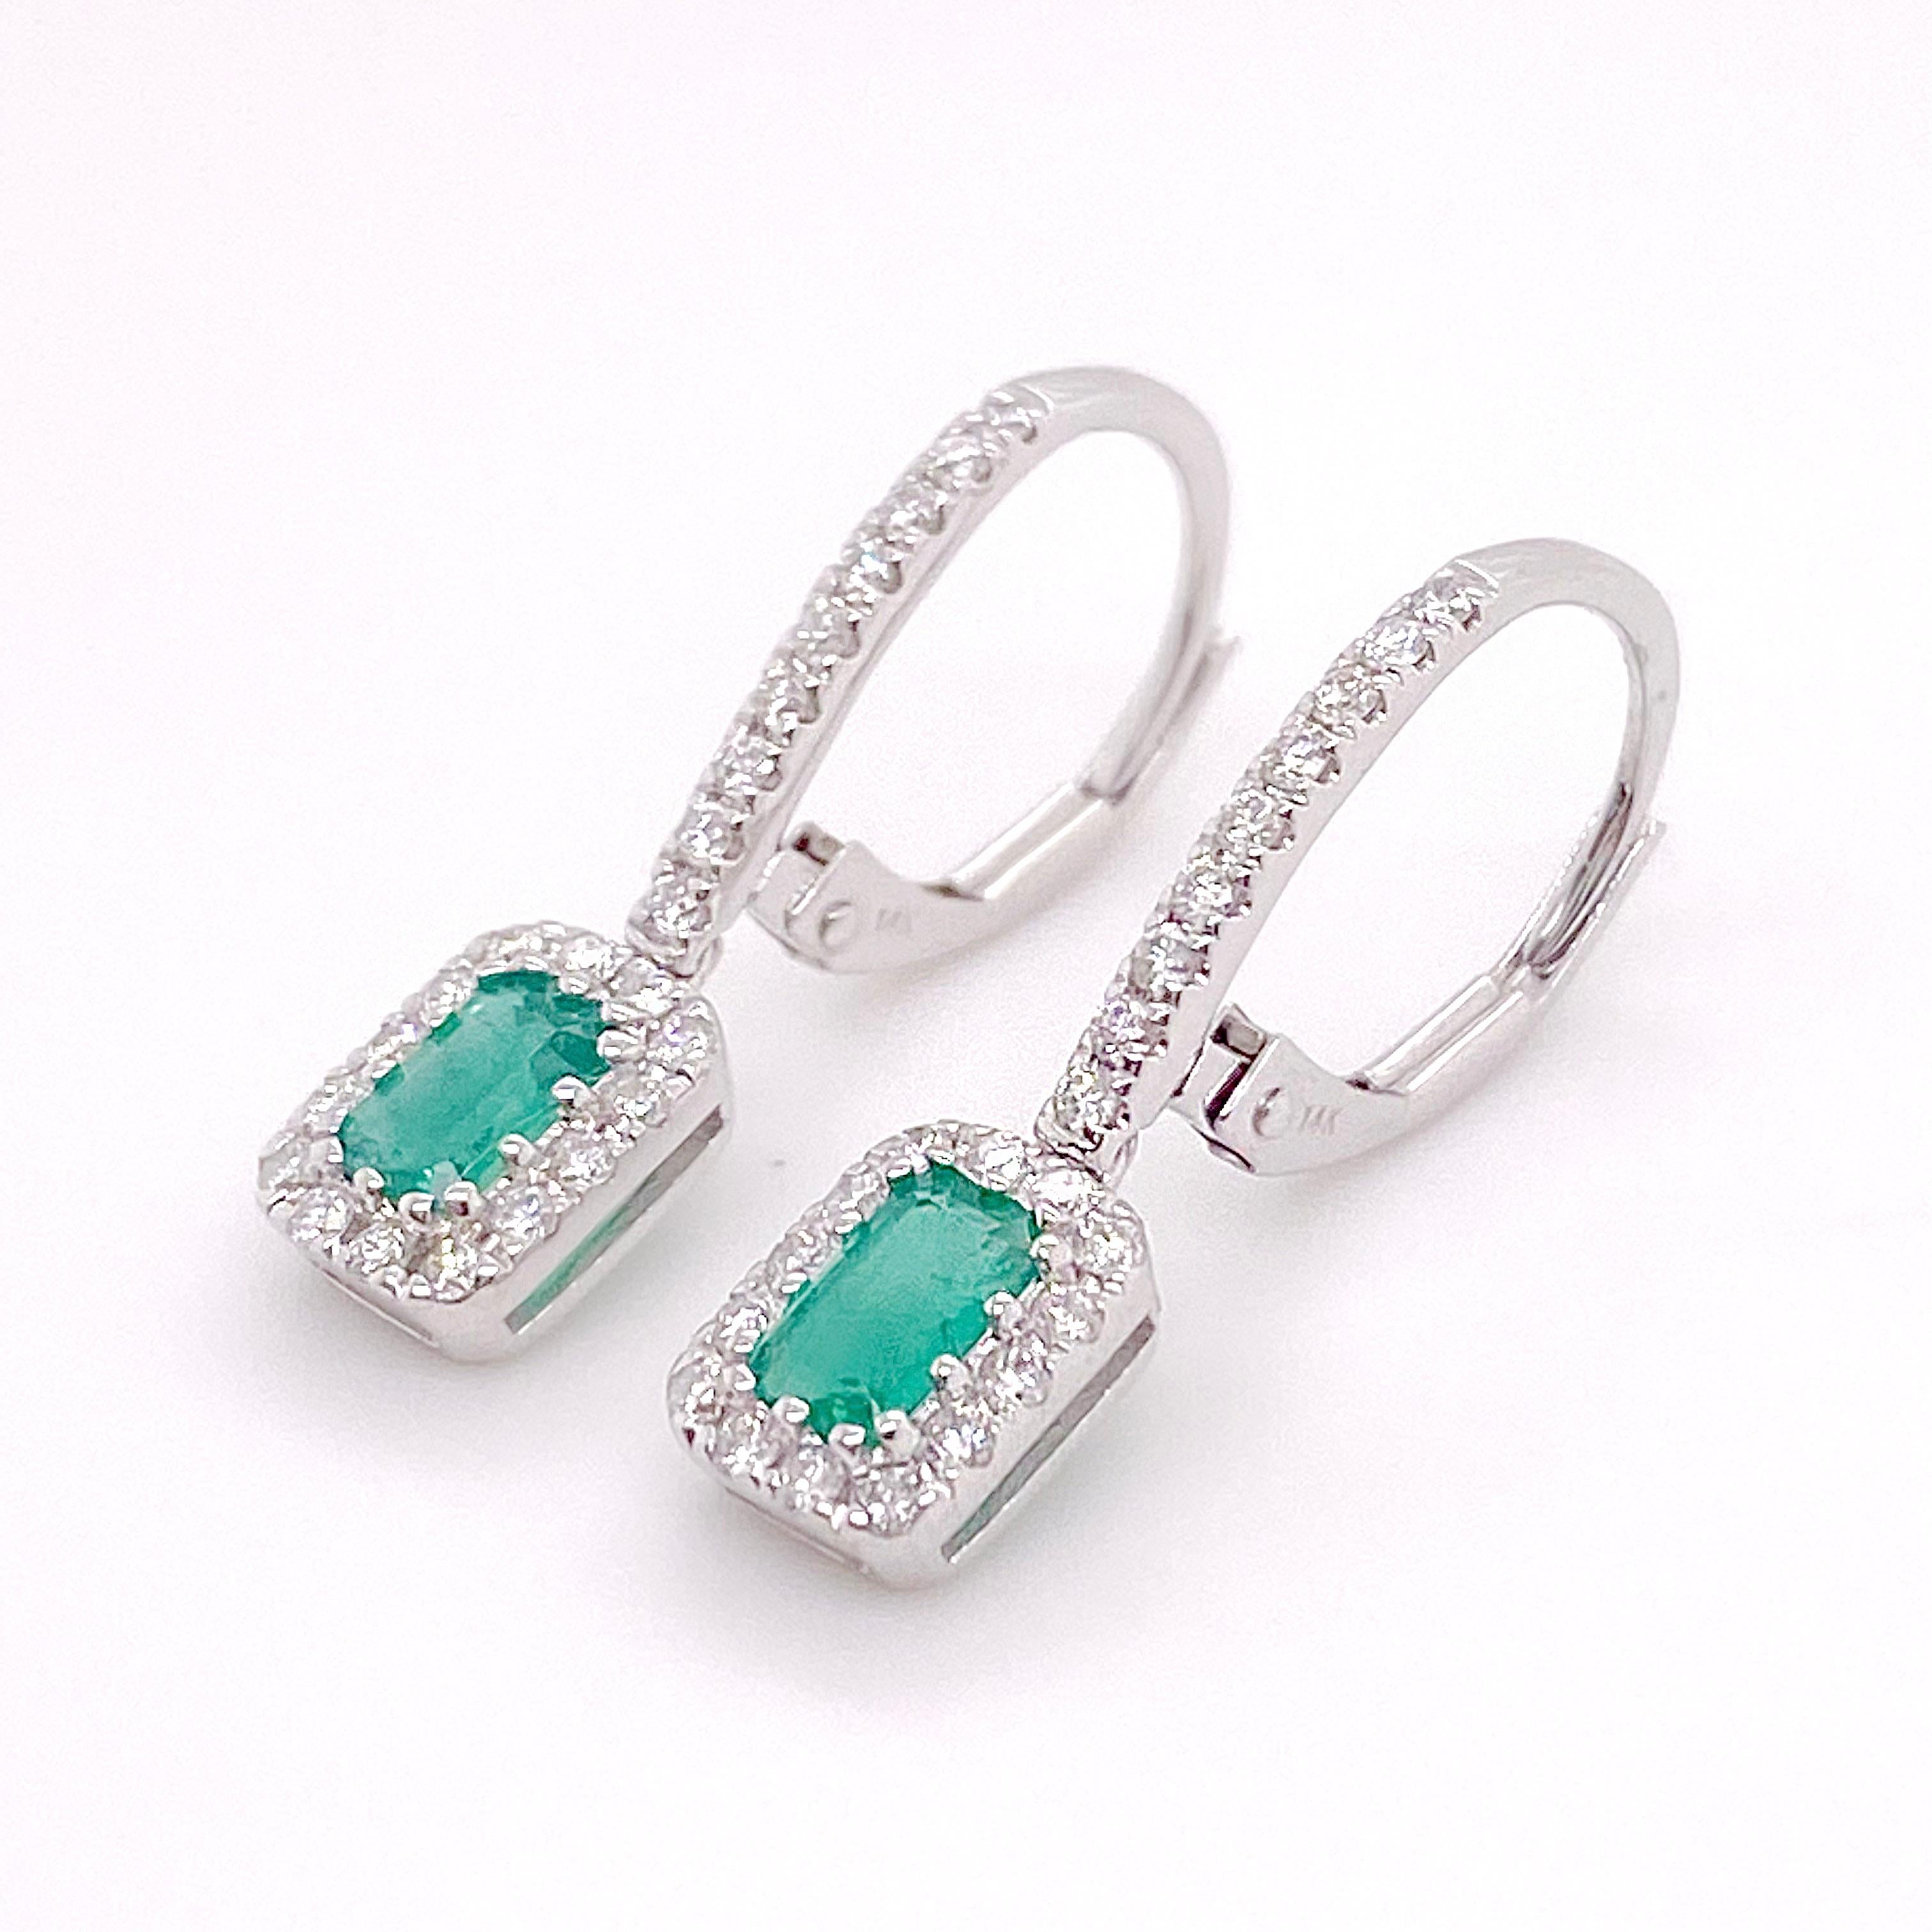 These gorgeous 14 karat white gold emerald and diamond drop earrings are perfect for a dressier occasion or for a wedding! The emerald cut green emerald is set beautifully in the center of 24 diamonds and the tops of the earrings have a strong